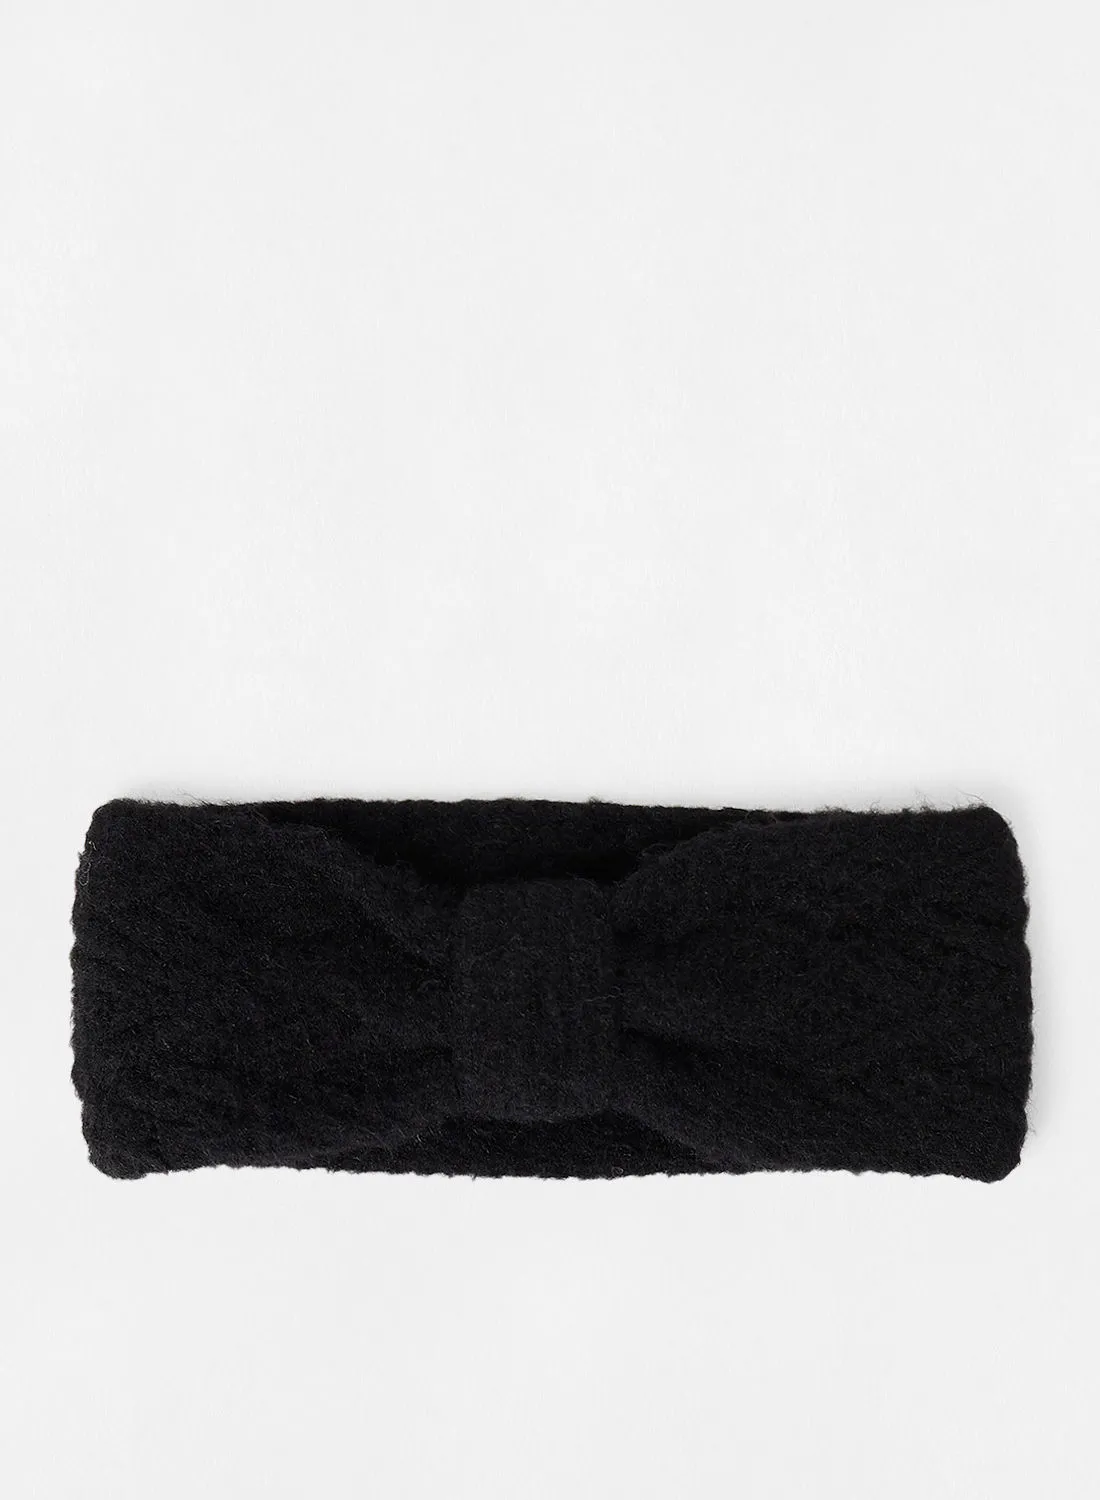 PIECES Knotted Headband Black 